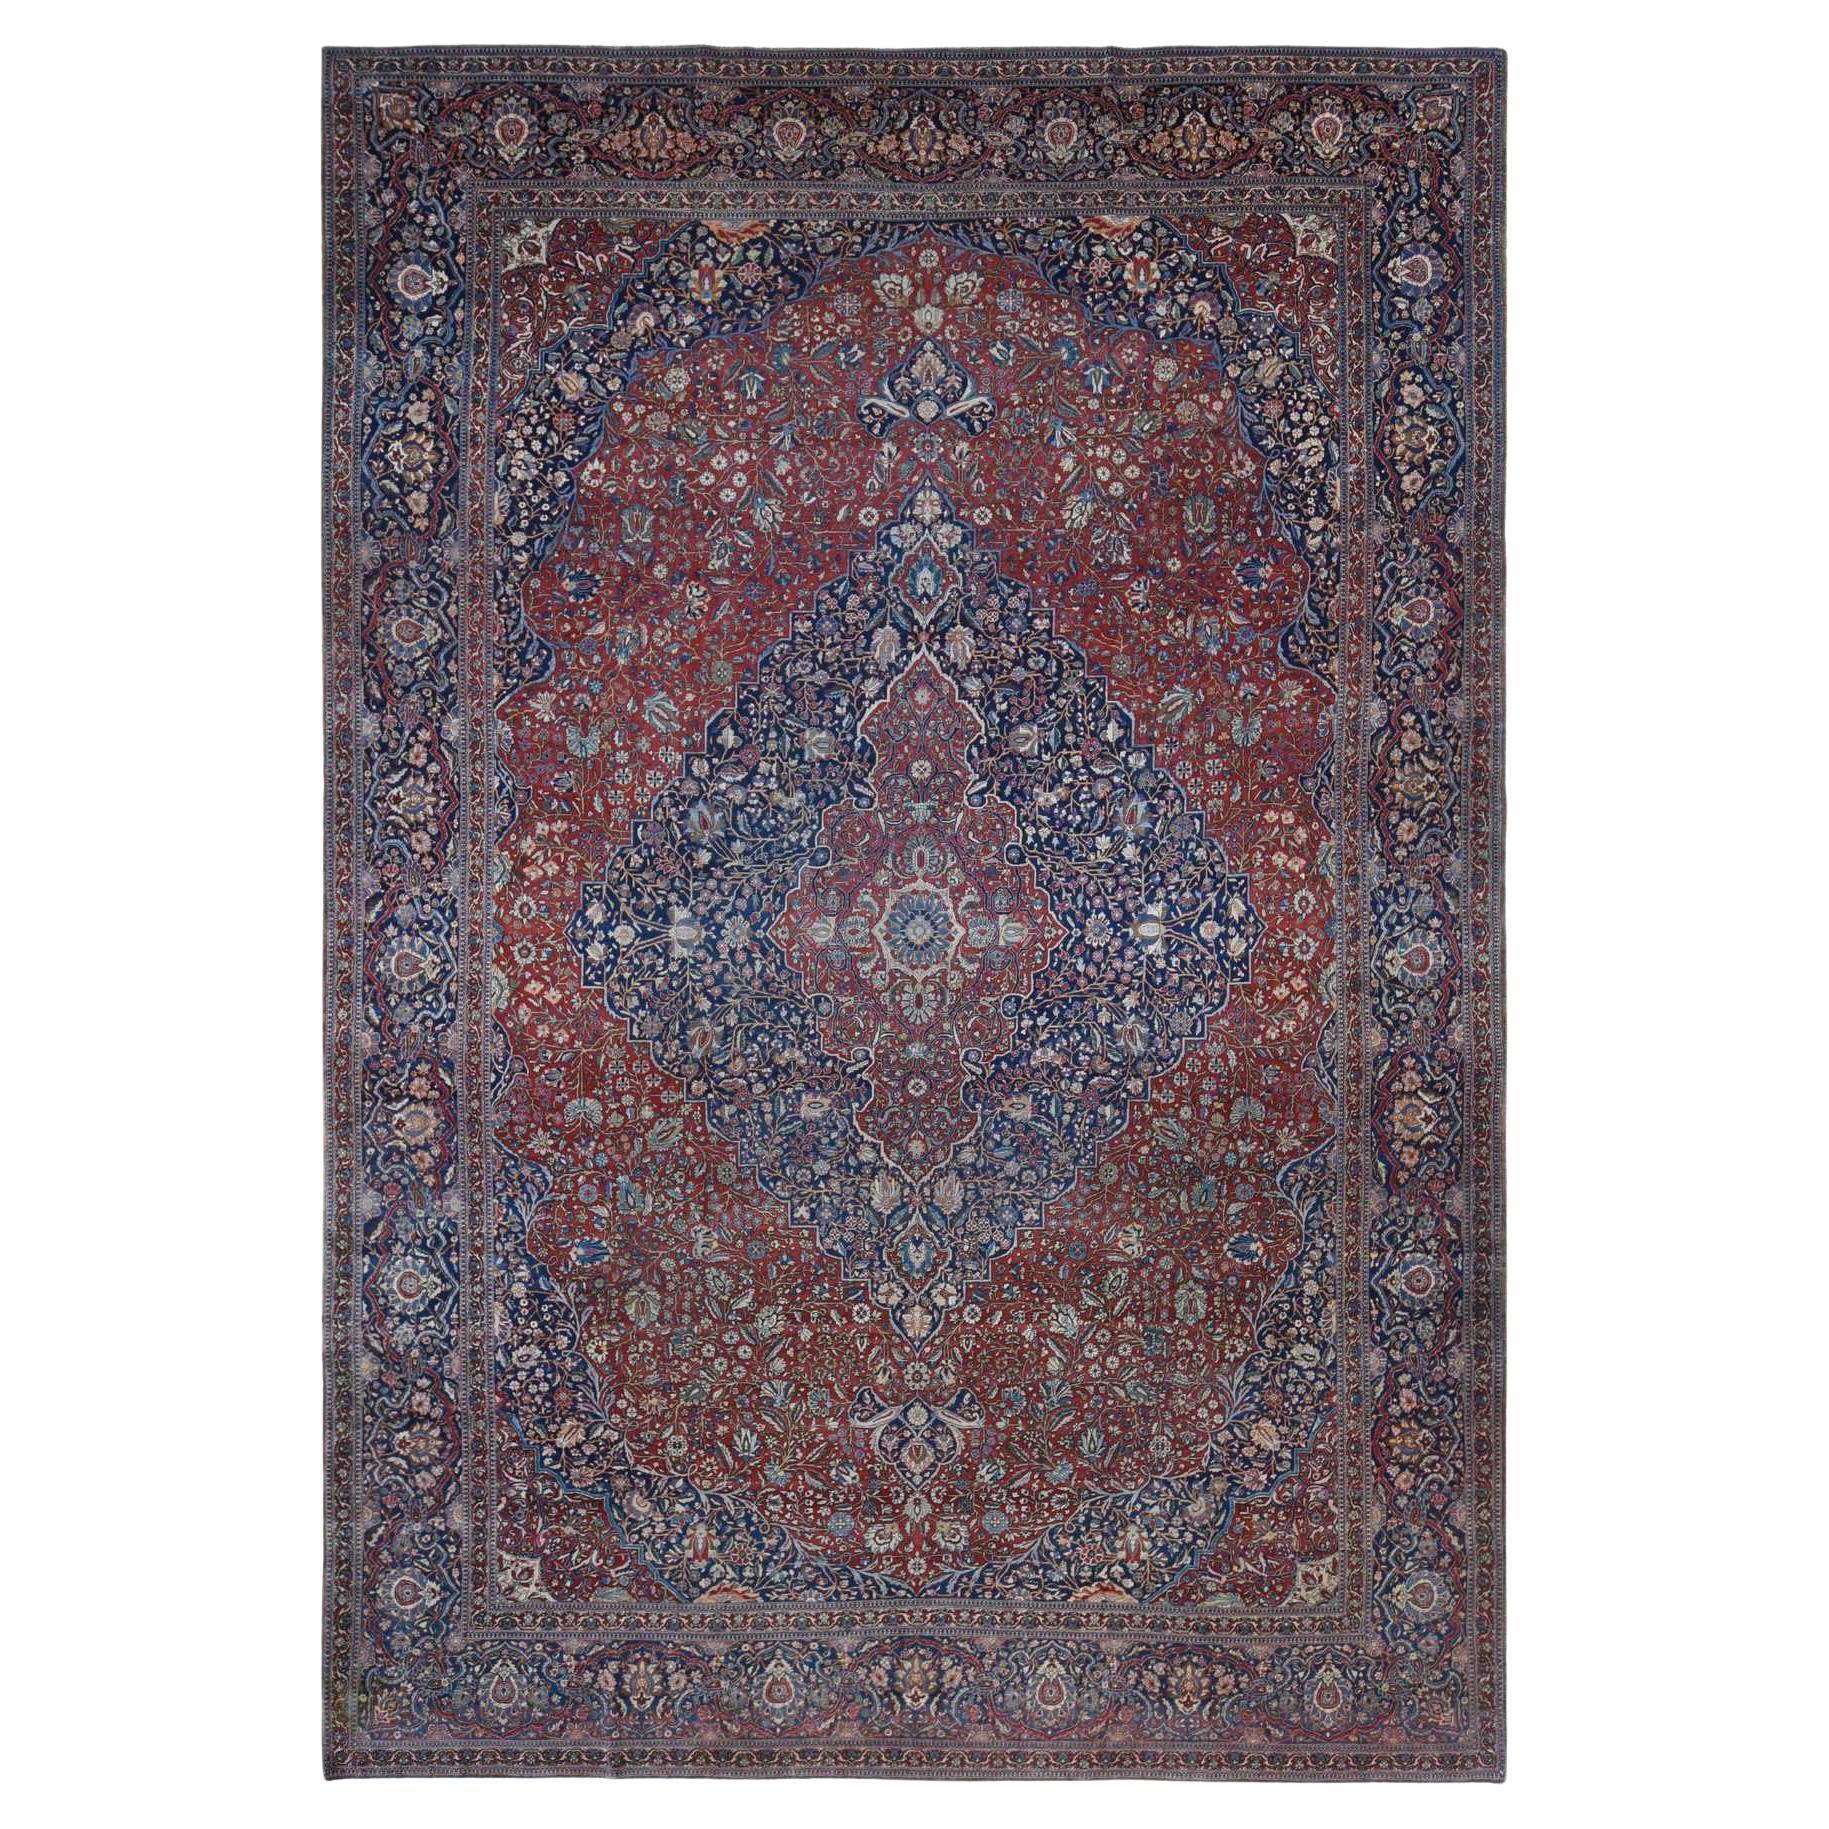 Barn Red Antique Persian Kashan Debir Hand Knotsted Pure Wool Clean Oversized Rug (tapis surdimensionné en pure laine)